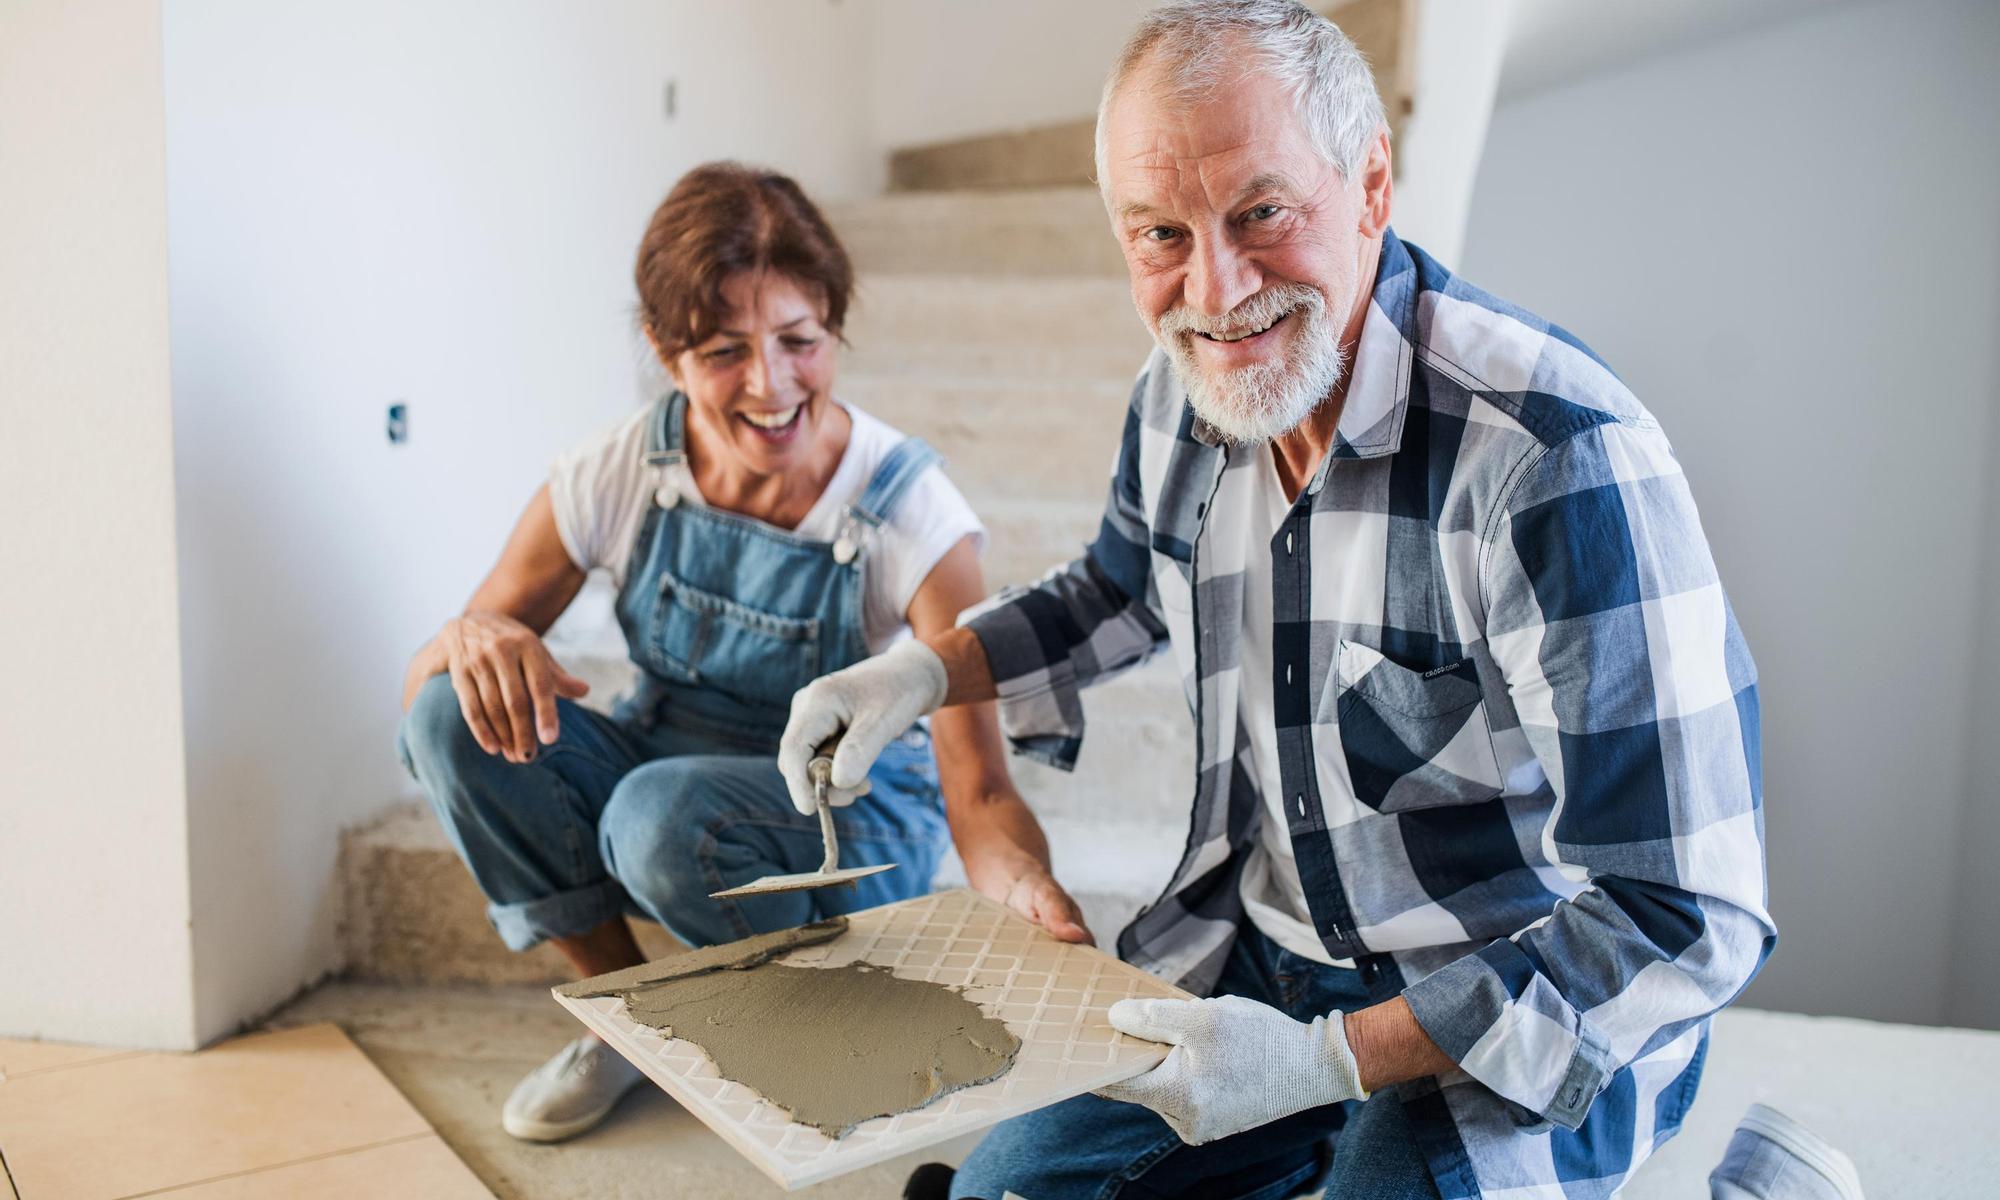 Old man and woman working on interior of new house or flat.